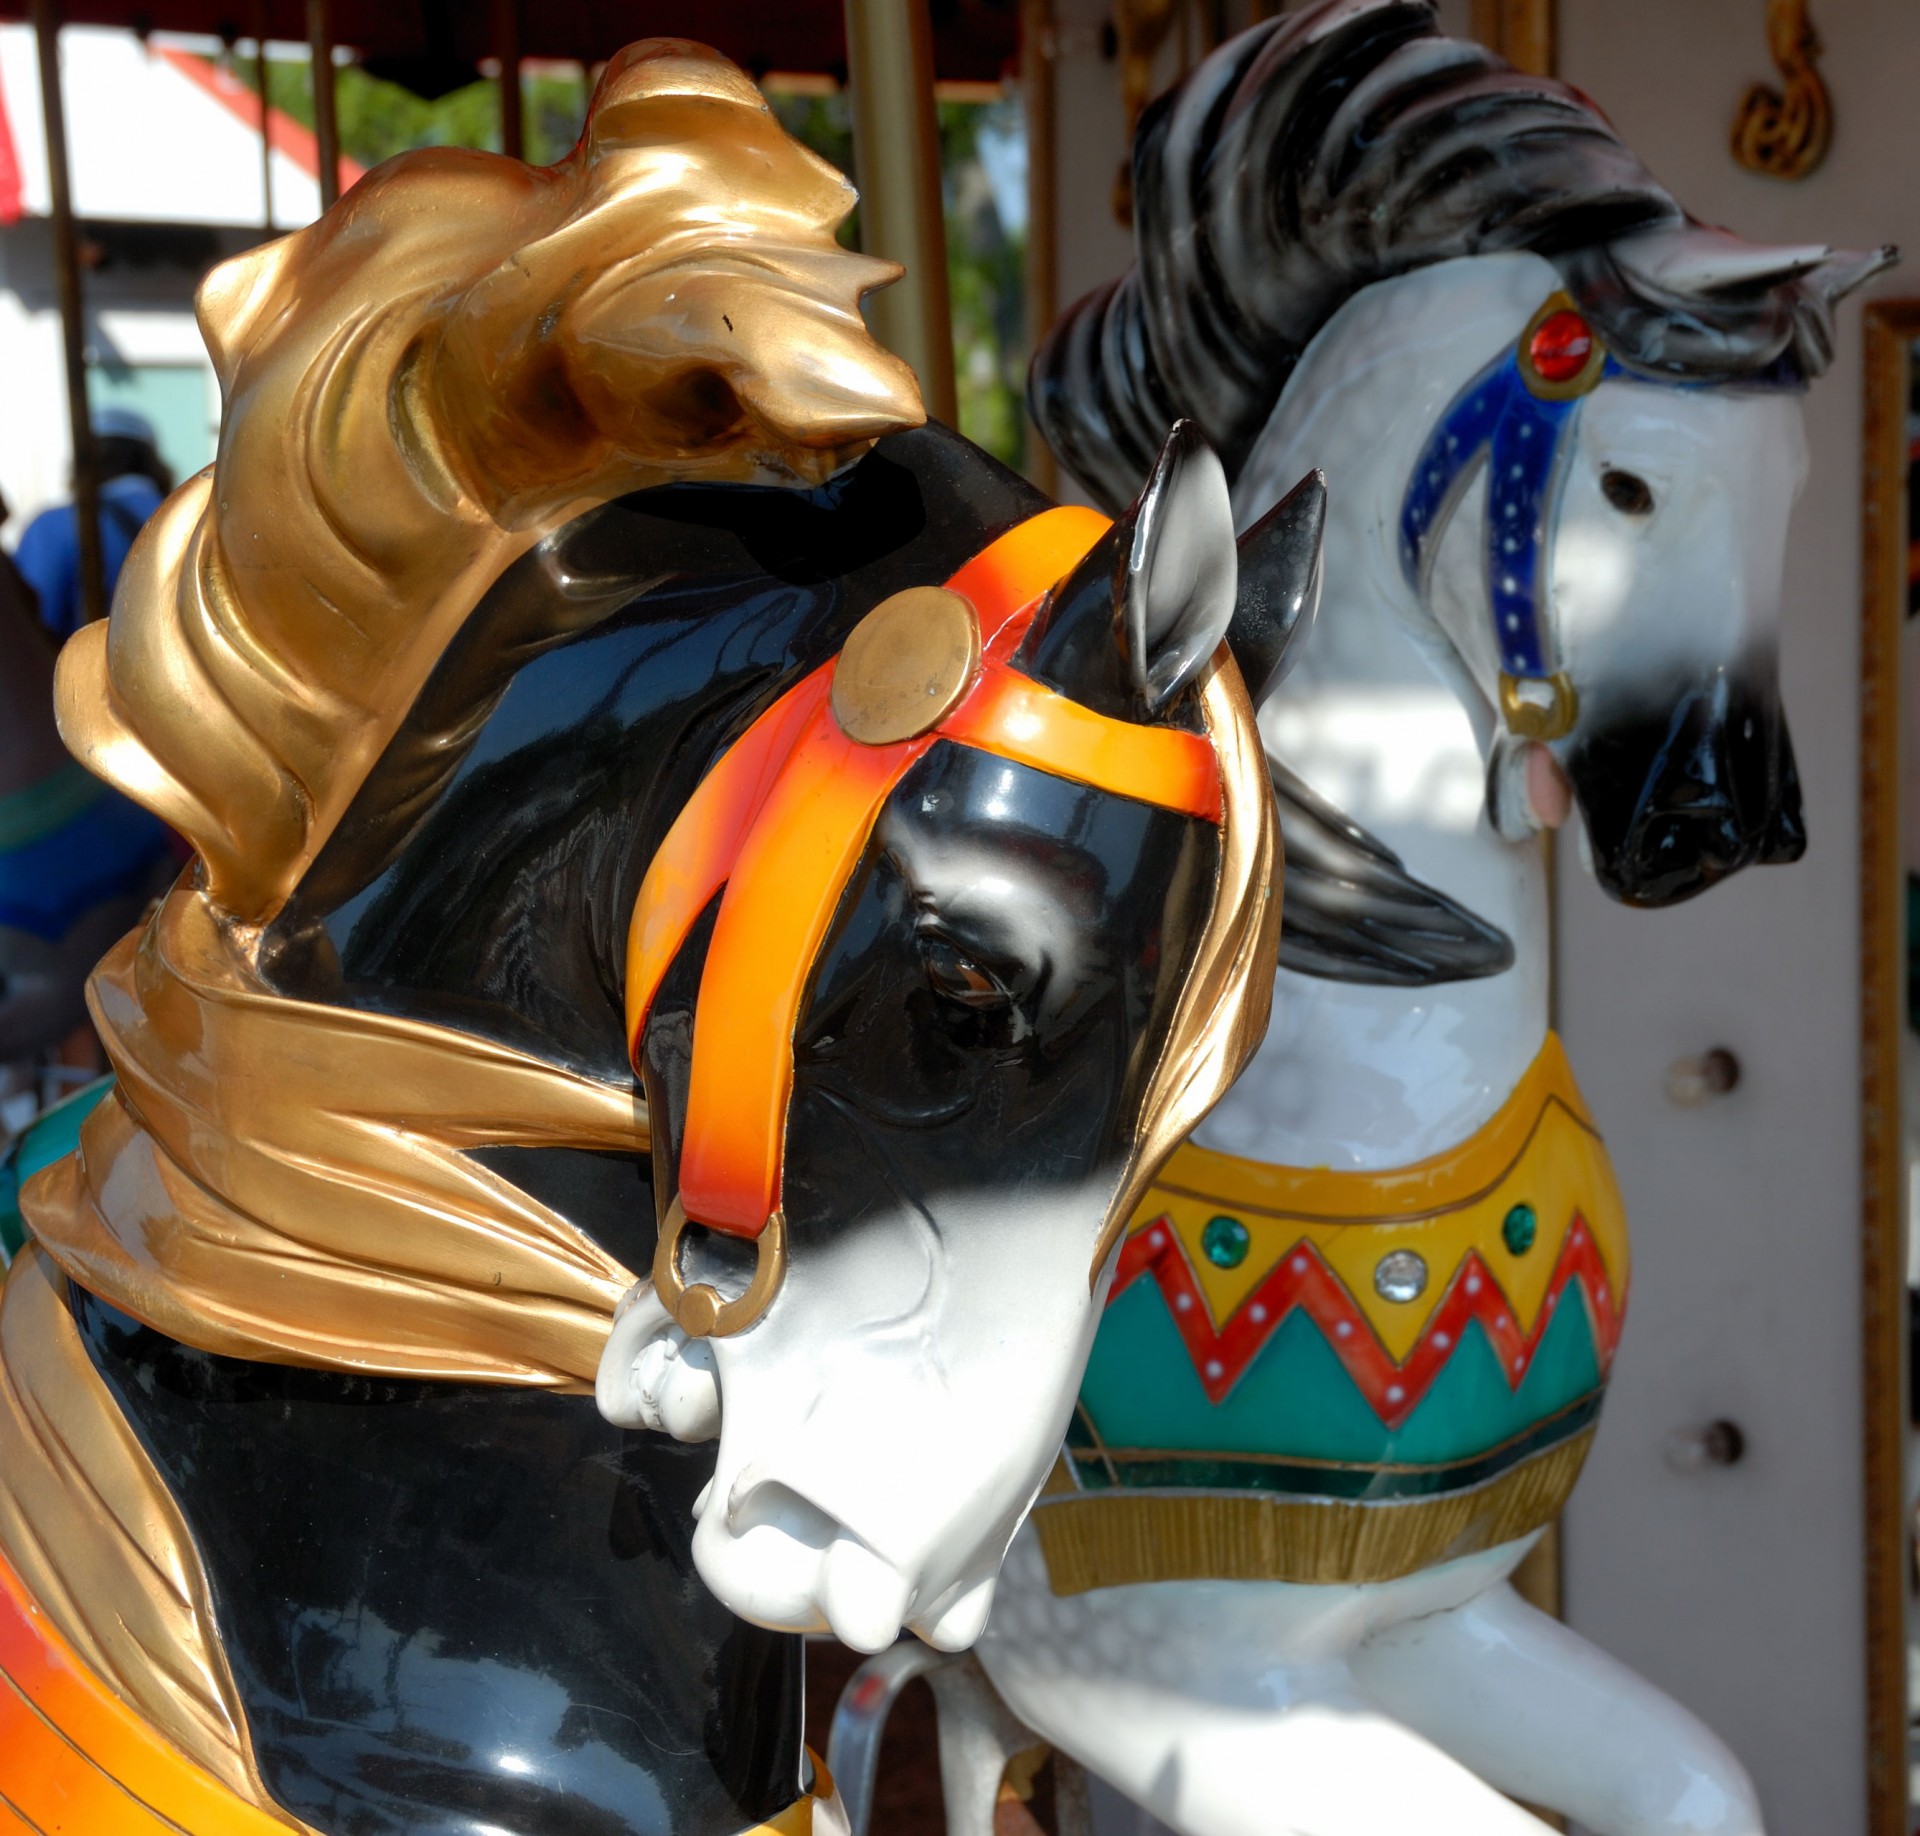 merry-go-round carousel colorful free photo